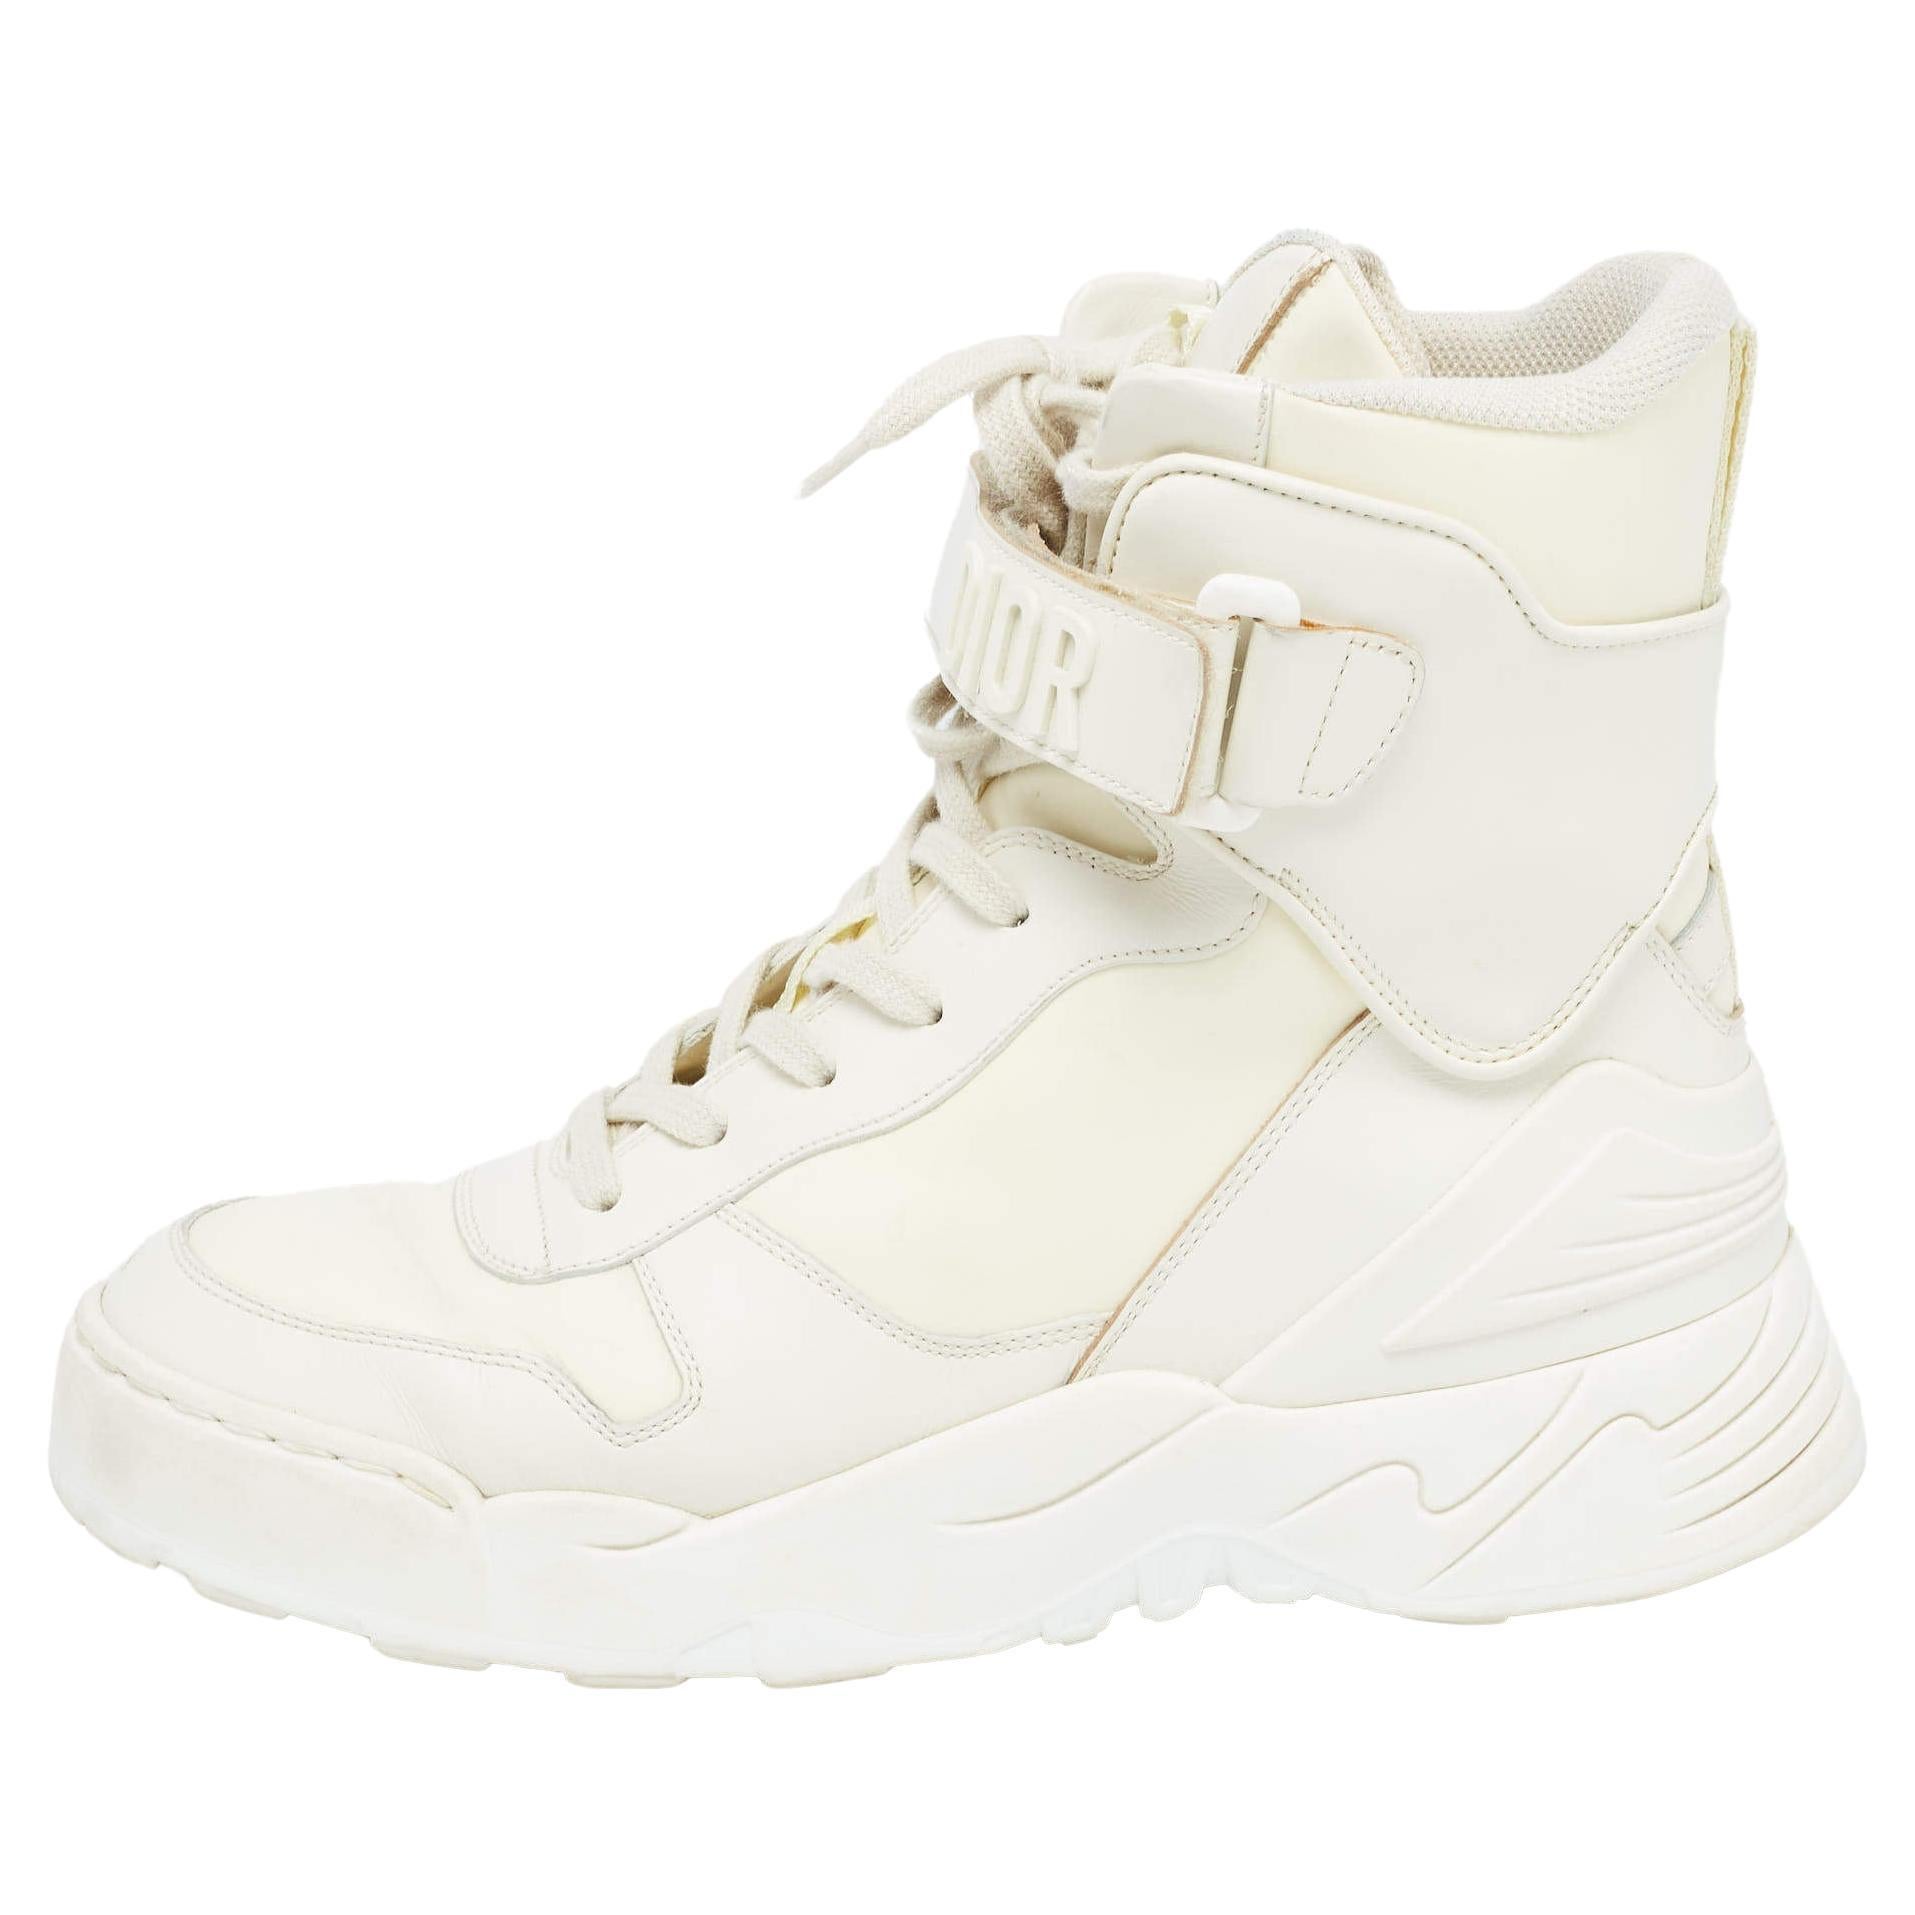 Dior Cream Leather Jumper High Top Sneakers Size 36 For Sale